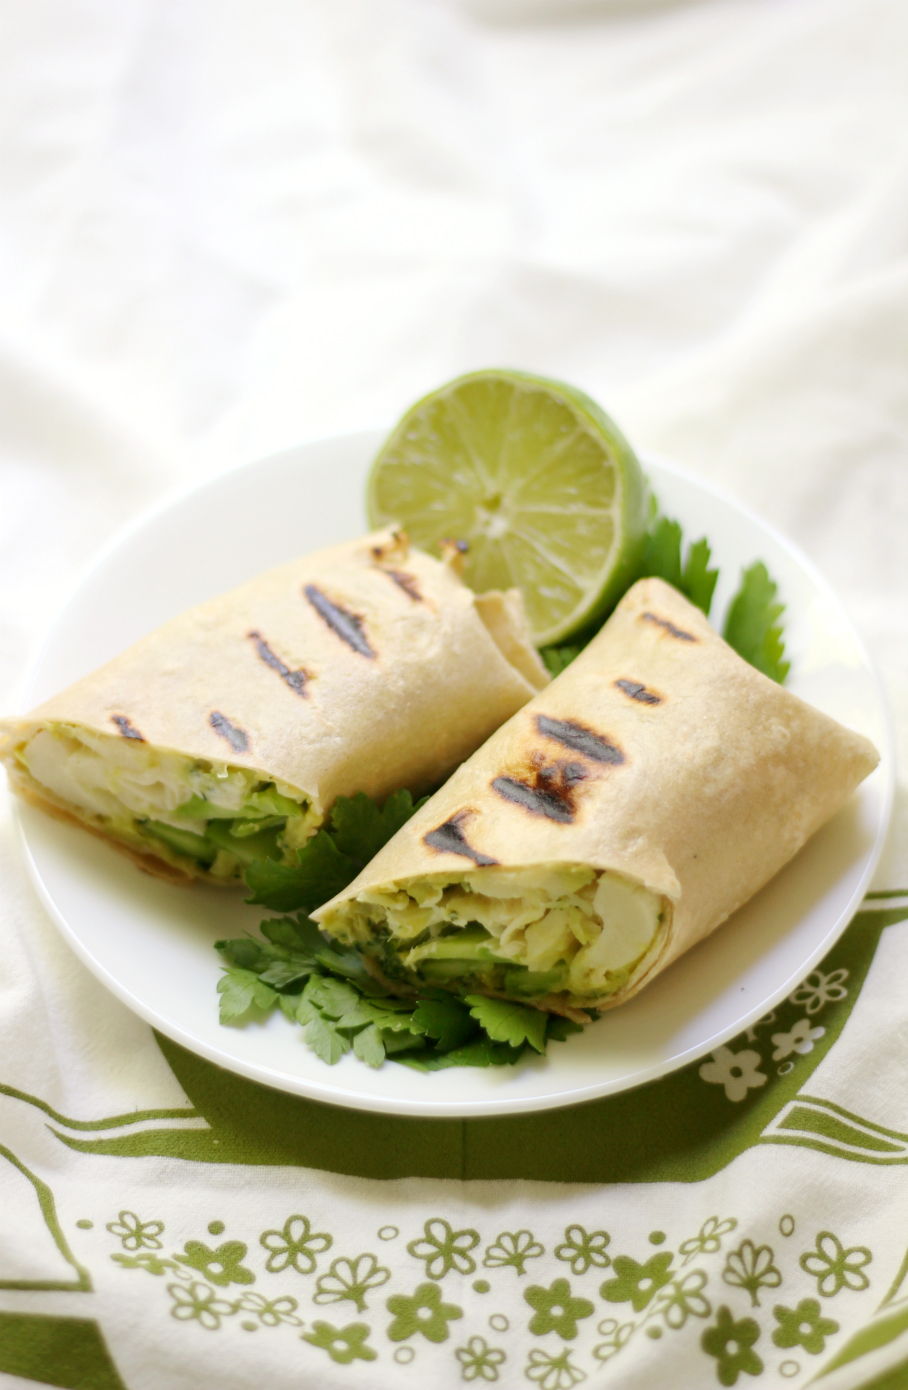 Grilled Green Goddess Wraps | Strength and Sunshine @RebeccaGF666 No more boring lunches! These Grilled Green Goddess Wraps are full of green goodness and nutrition with a lima bean spread, broccoli, and hearts of palm! Gluten-free, nut-free, and vegan, these wraps are a healthy recipe that's school or work friendly and freezable!